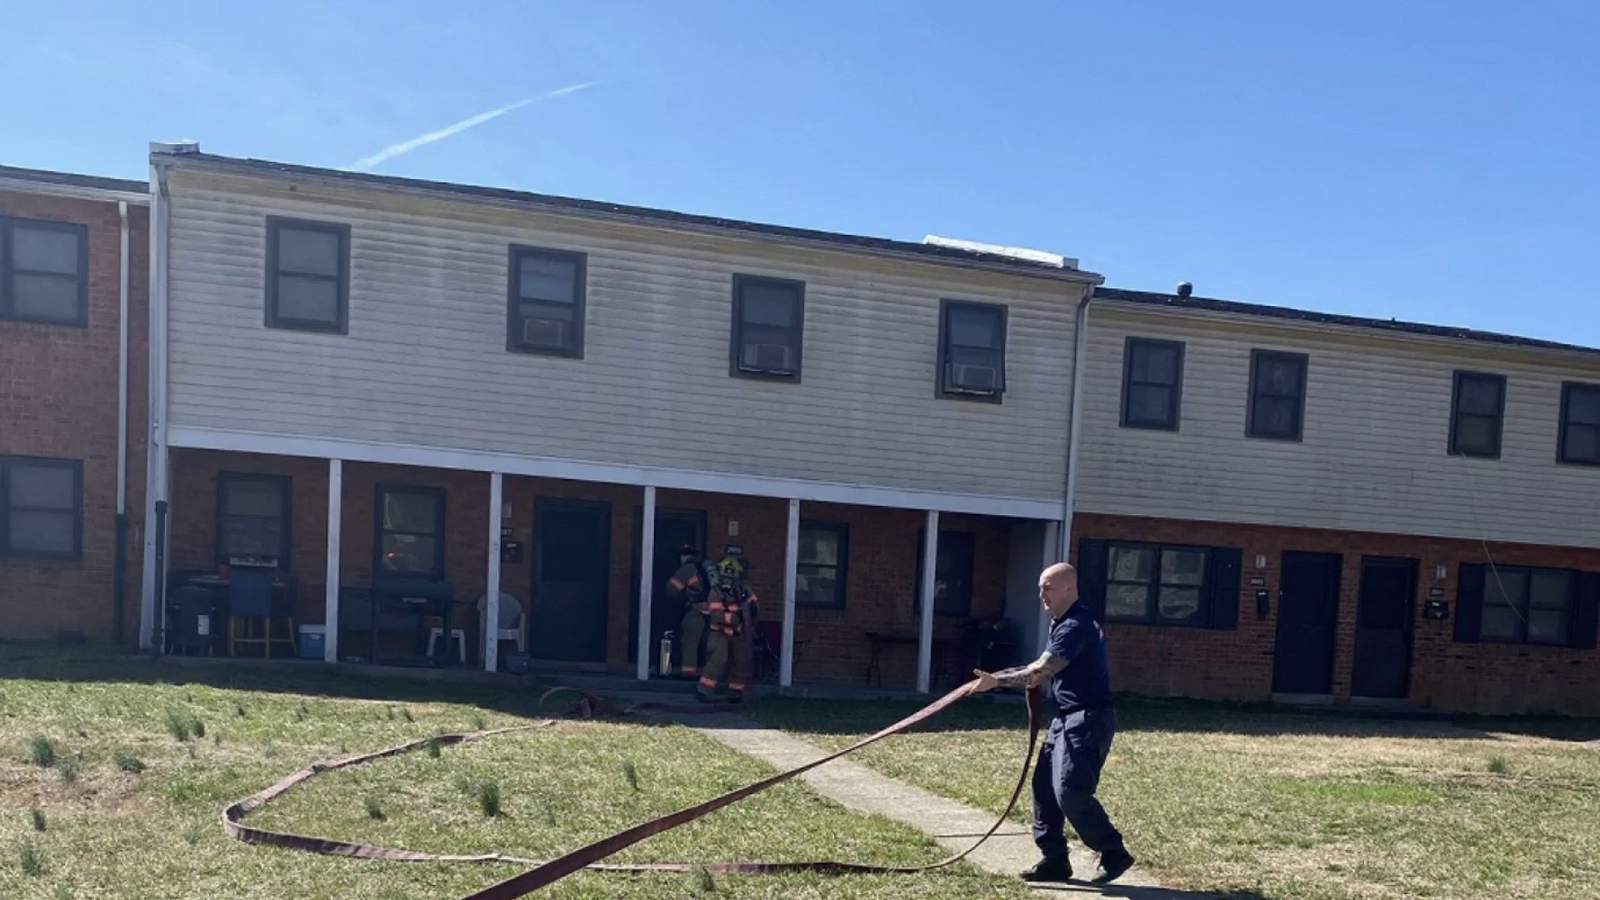 Four displaced after fire in southeast Roanoke